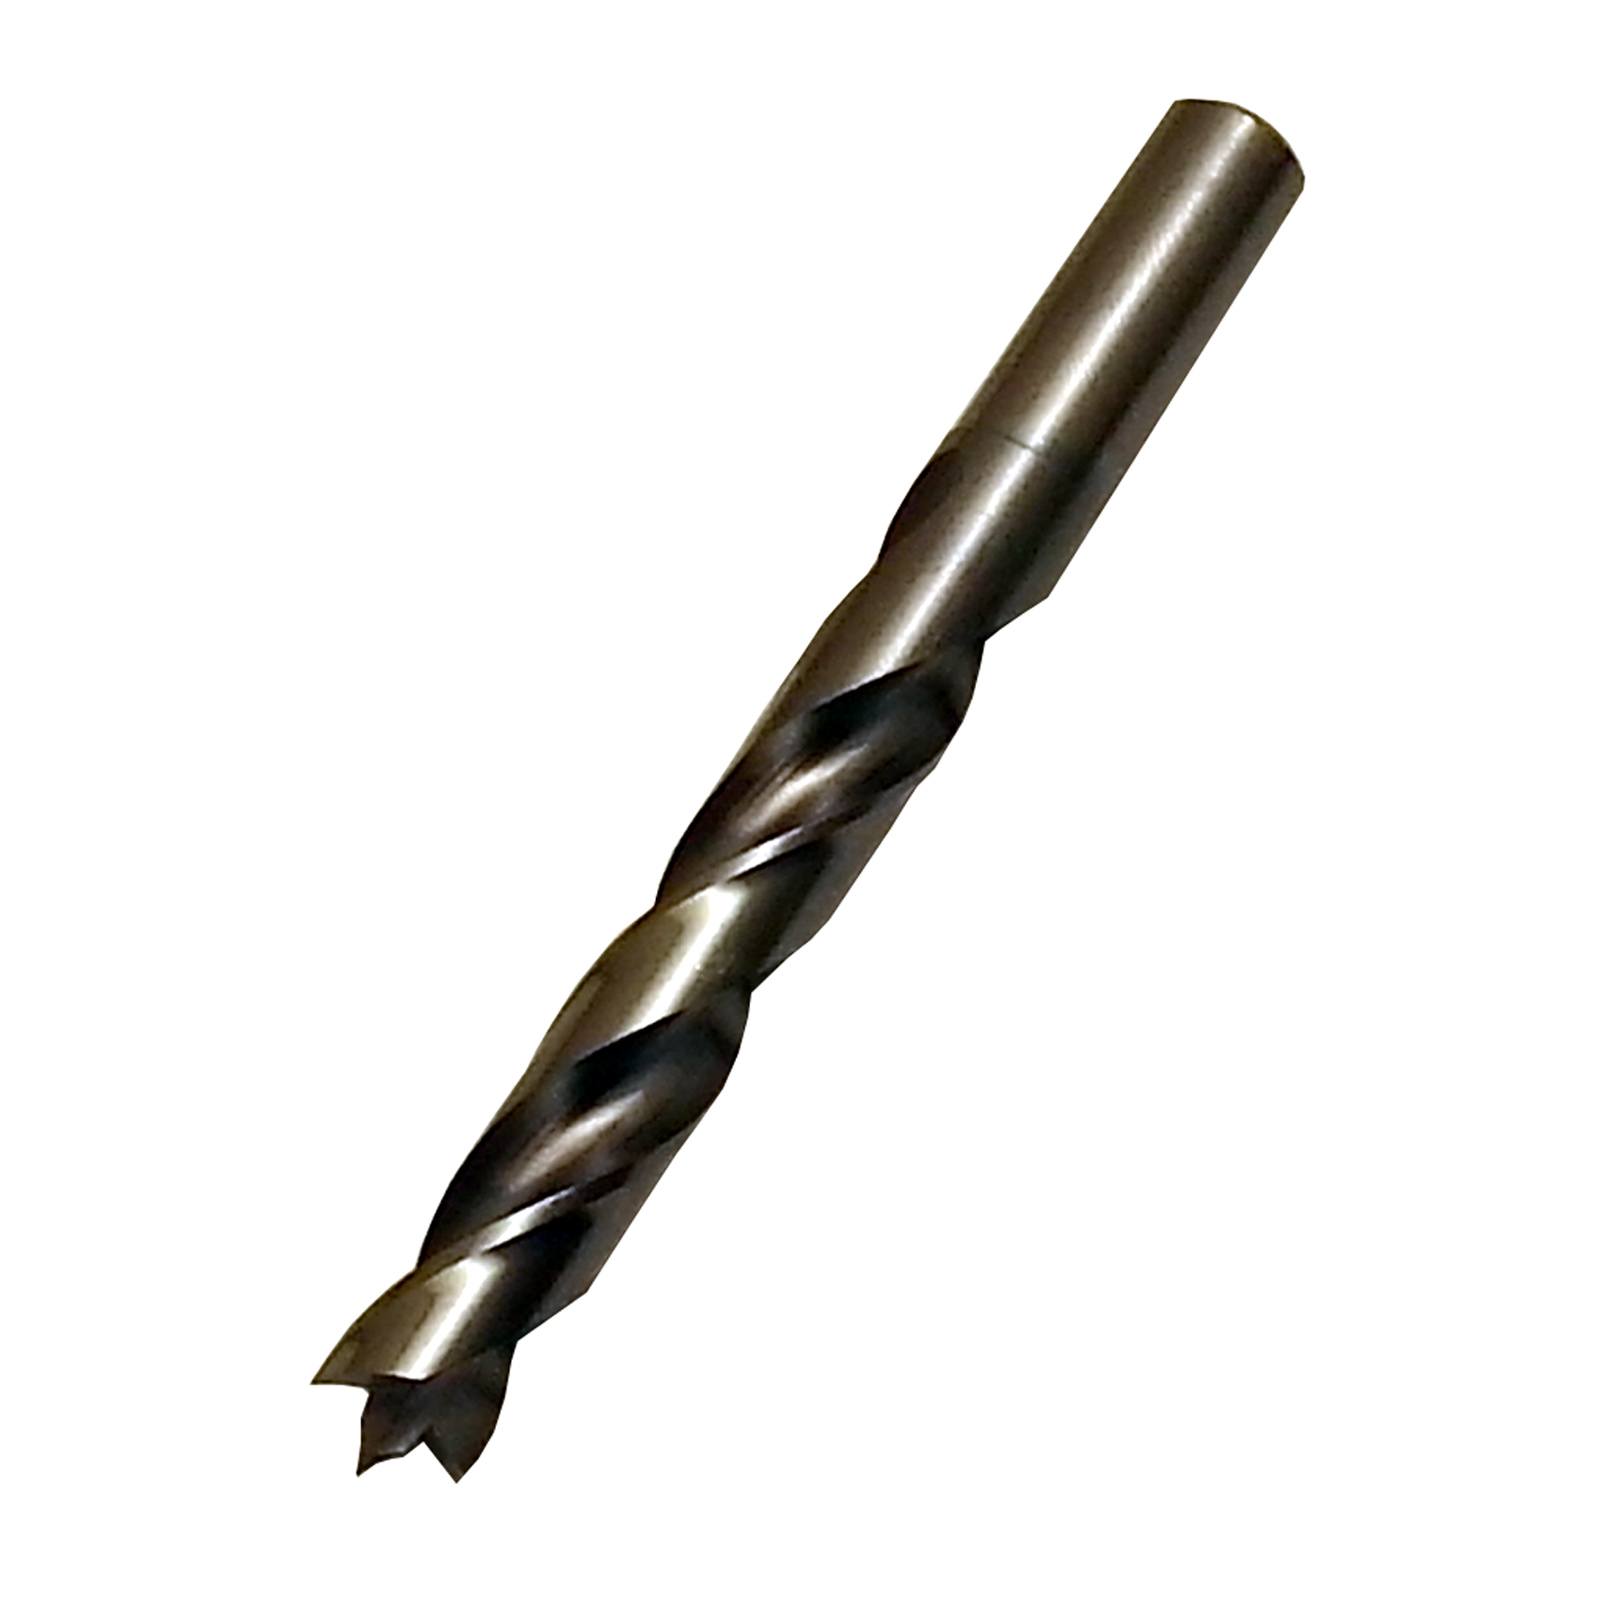 Ground Finish 12 Length Pack of 1 13mm Size 118 Degrees Conventional Point Michigan Drill 212M Series High-Speed Steel Extra-Long Length Drill Bit Round Shank Spiral Flute 